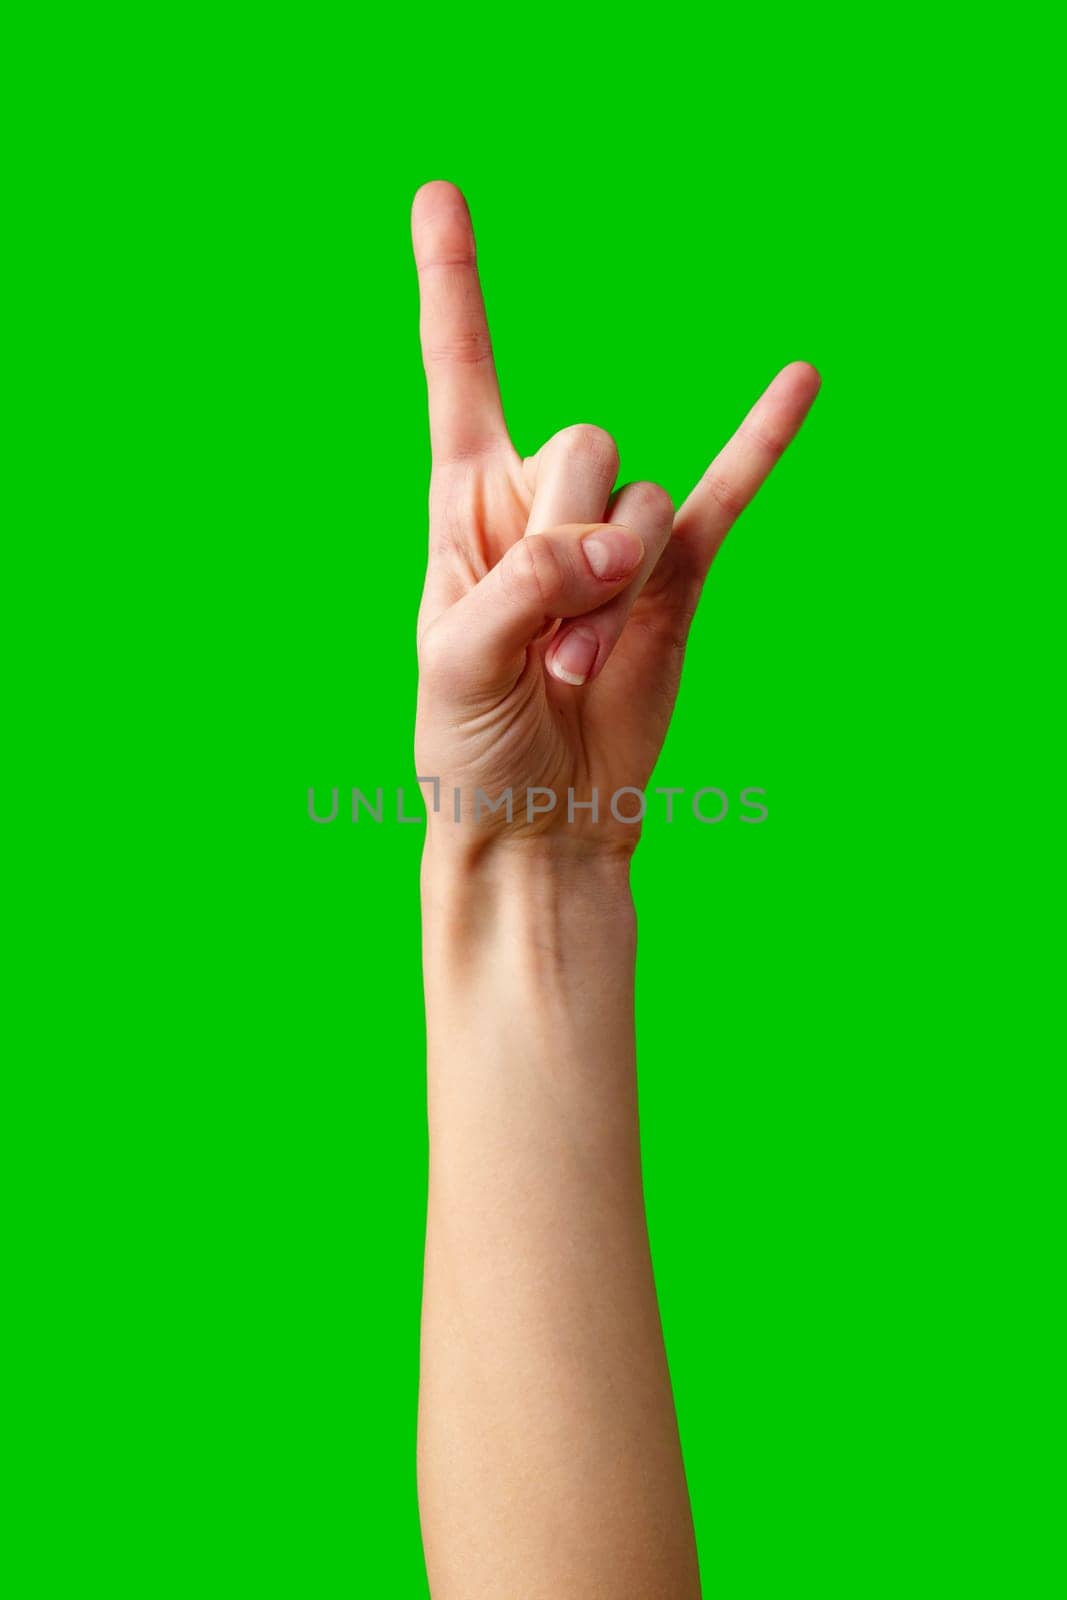 A person extending their hand with two fingers raised in a V-shaped peace sign gesture.